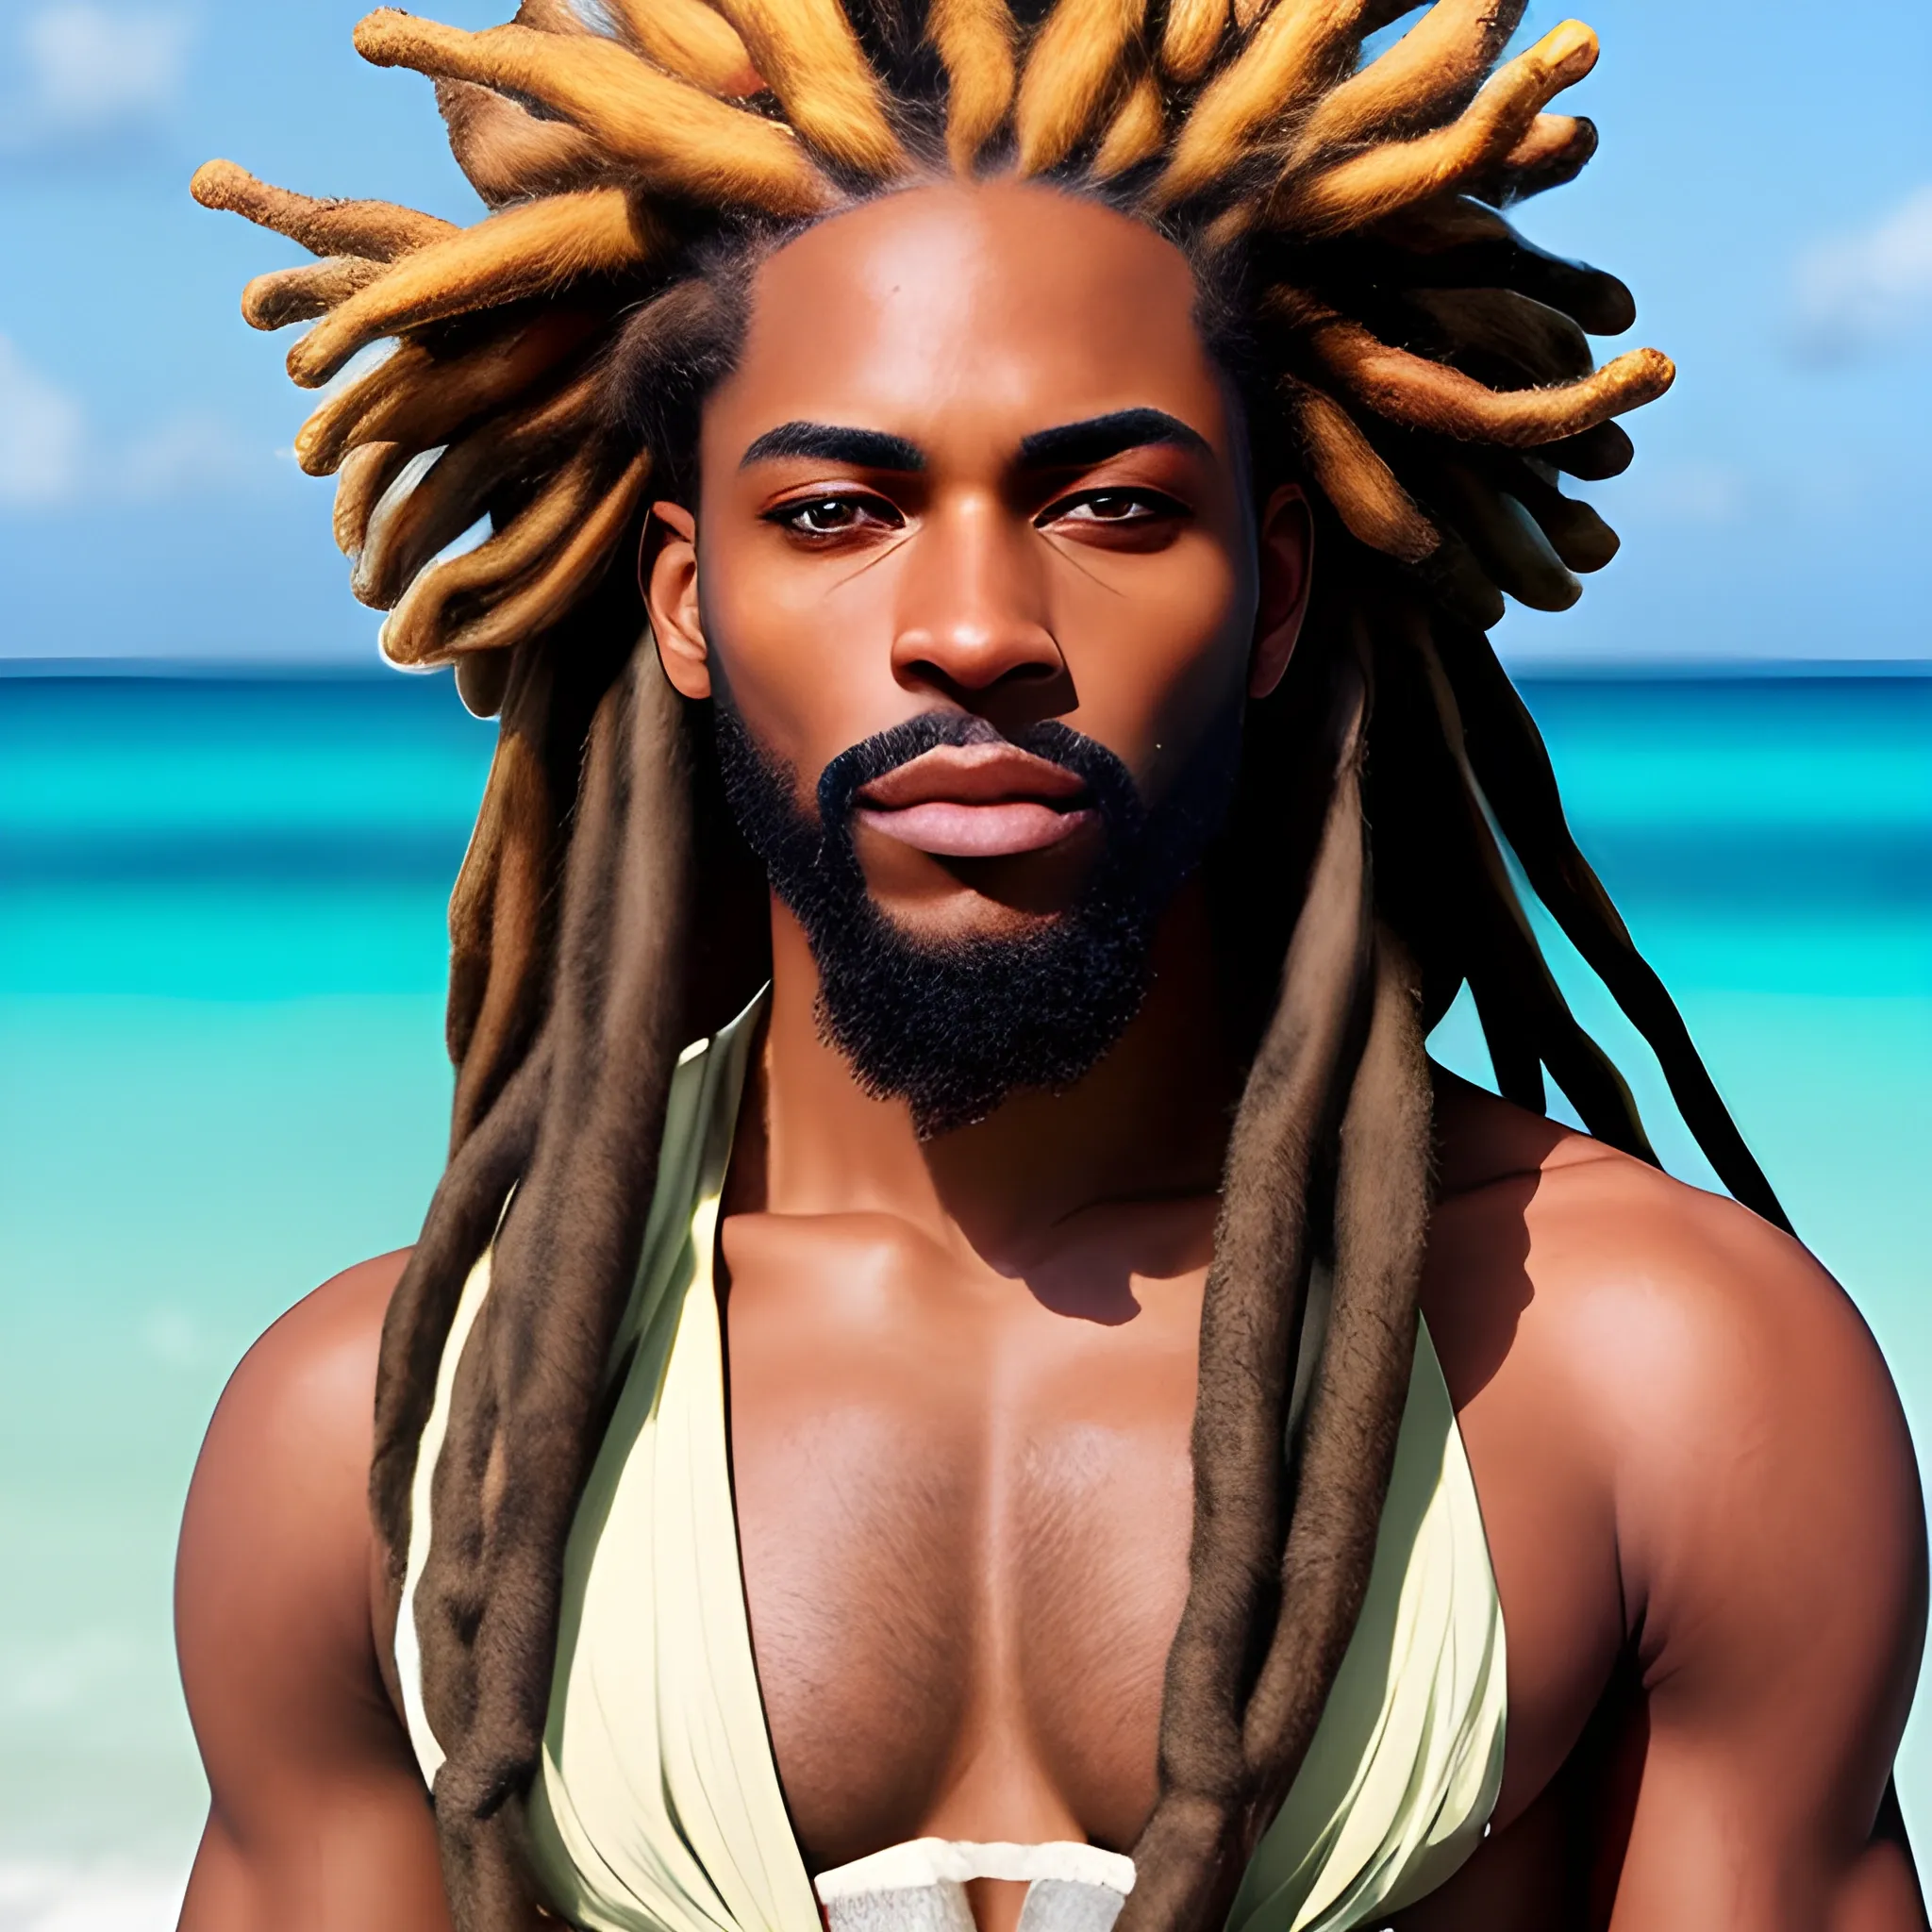 In this photograph, we aim to capture the beauty of a single handsome black man with perfectly detailed green eyes and long waist-length dreadlocks. The focus is on portraying a realistic representation that showcases his captivating features and allure. The photograph will depict the man dressed in Rastafarian clothing and situated on a beautiful and crowded beach as the background.

Characteristics of the Man:

A black man with distinct African features, radiating confidence and charm.
His striking green eyes, meticulously rendered to showcase their depth and brilliance, adding a touch of allure to the image.
Long dreadlocks, extending gracefully down to his waist, reflecting his unique style and cultural identity.
Facial Details:

The facial features should be intrinsically detailed, capturing his captivating good looks and magnetic charisma.
Emphasize his strong jawline, high cheekbones, and well-proportioned lips, highlighting the charm of his face.
The eyes should be the focal point, their green color drawing the viewer in, exuding a sense of depth and soulfulness.
Skin Detail:

The skin should be rendered with exceptional realism, reflecting its rich and smooth texture, and accentuating its natural beauty.
Pay close attention to the interplay of light and shadow, enhancing the natural contours of his face.
Dreadlocks:

The dreadlocks should be meticulously detailed, capturing the individual strands and distinct texture, showing their well-maintained appearance.
Showcase the length and fluidity of the dreadlocks, adding to the overall allure of the image.
Attire and Setting:

The man should be dressed in Rastafarian clothing, representing the vibrant and colorful style of the culture.
The background setting should be a beautiful and lively beach, with crystal-clear waters, golden sand, and a multitude of people enjoying the sun and waves.
Photography Technique:

Aim for a high-resolution photograph that impeccably captures every aspect of his appearance, from the eyes to the dreadlocks.
Utilize lighting to enhance his facial features and draw attention to the captivating green eyes.
The composition should be thoughtfully crafted to highlight his unique beauty against the backdrop of the vibrant beach scene., Cartoon